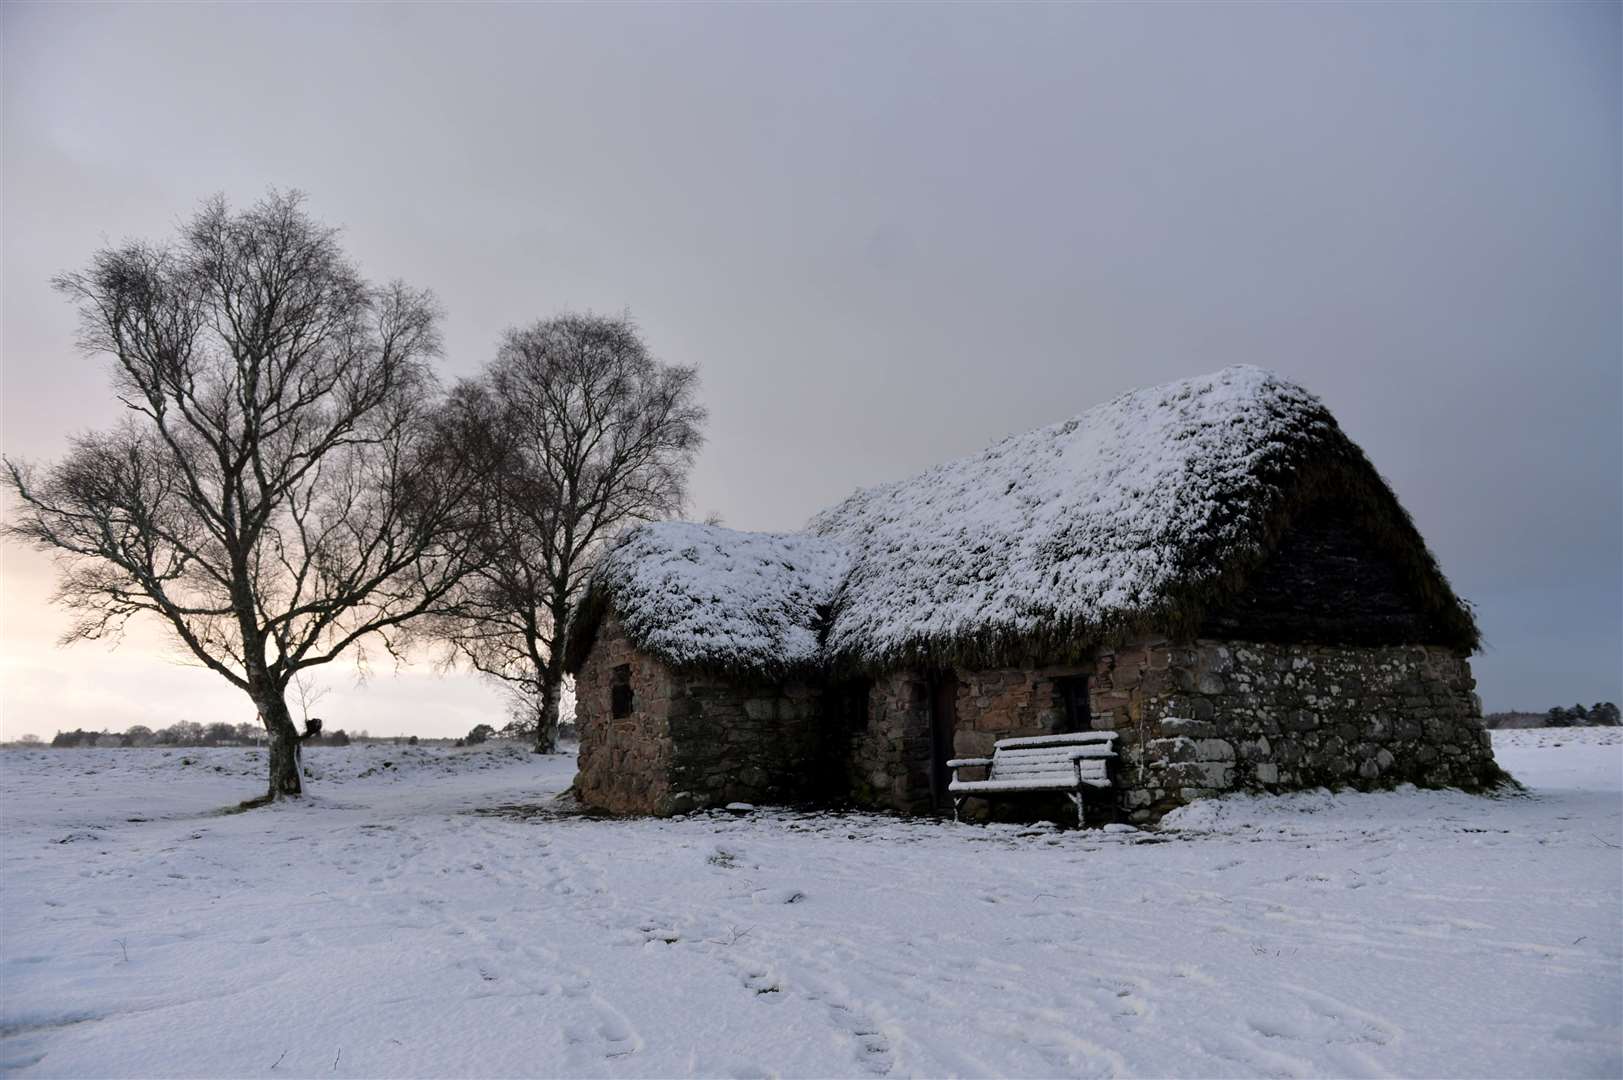 The snowfalls in Inverness provided scenic wintry scenes.